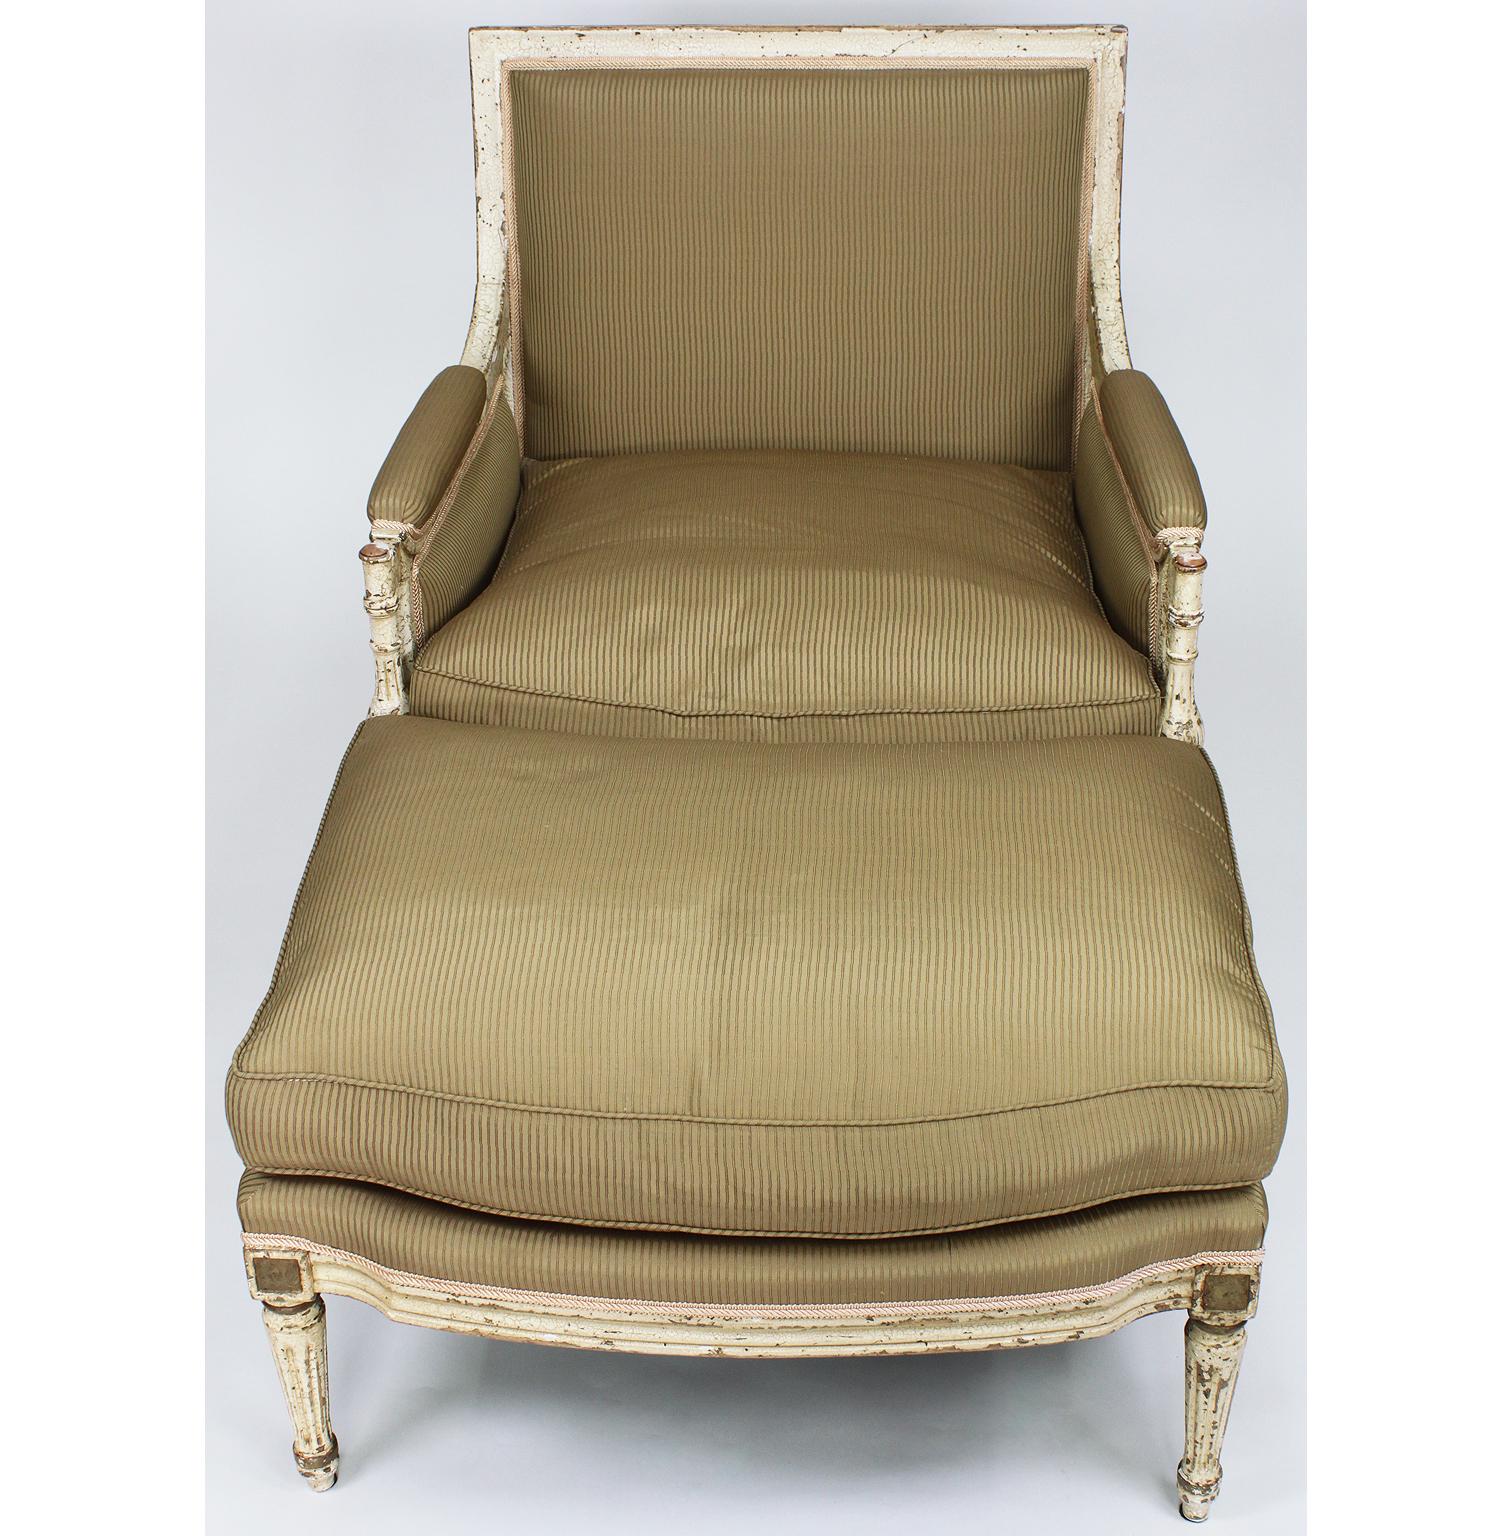 French 19th Century Louis XVI Style White-Painted Lounge Chaise Ottoman Armchair In Distressed Condition For Sale In Los Angeles, CA